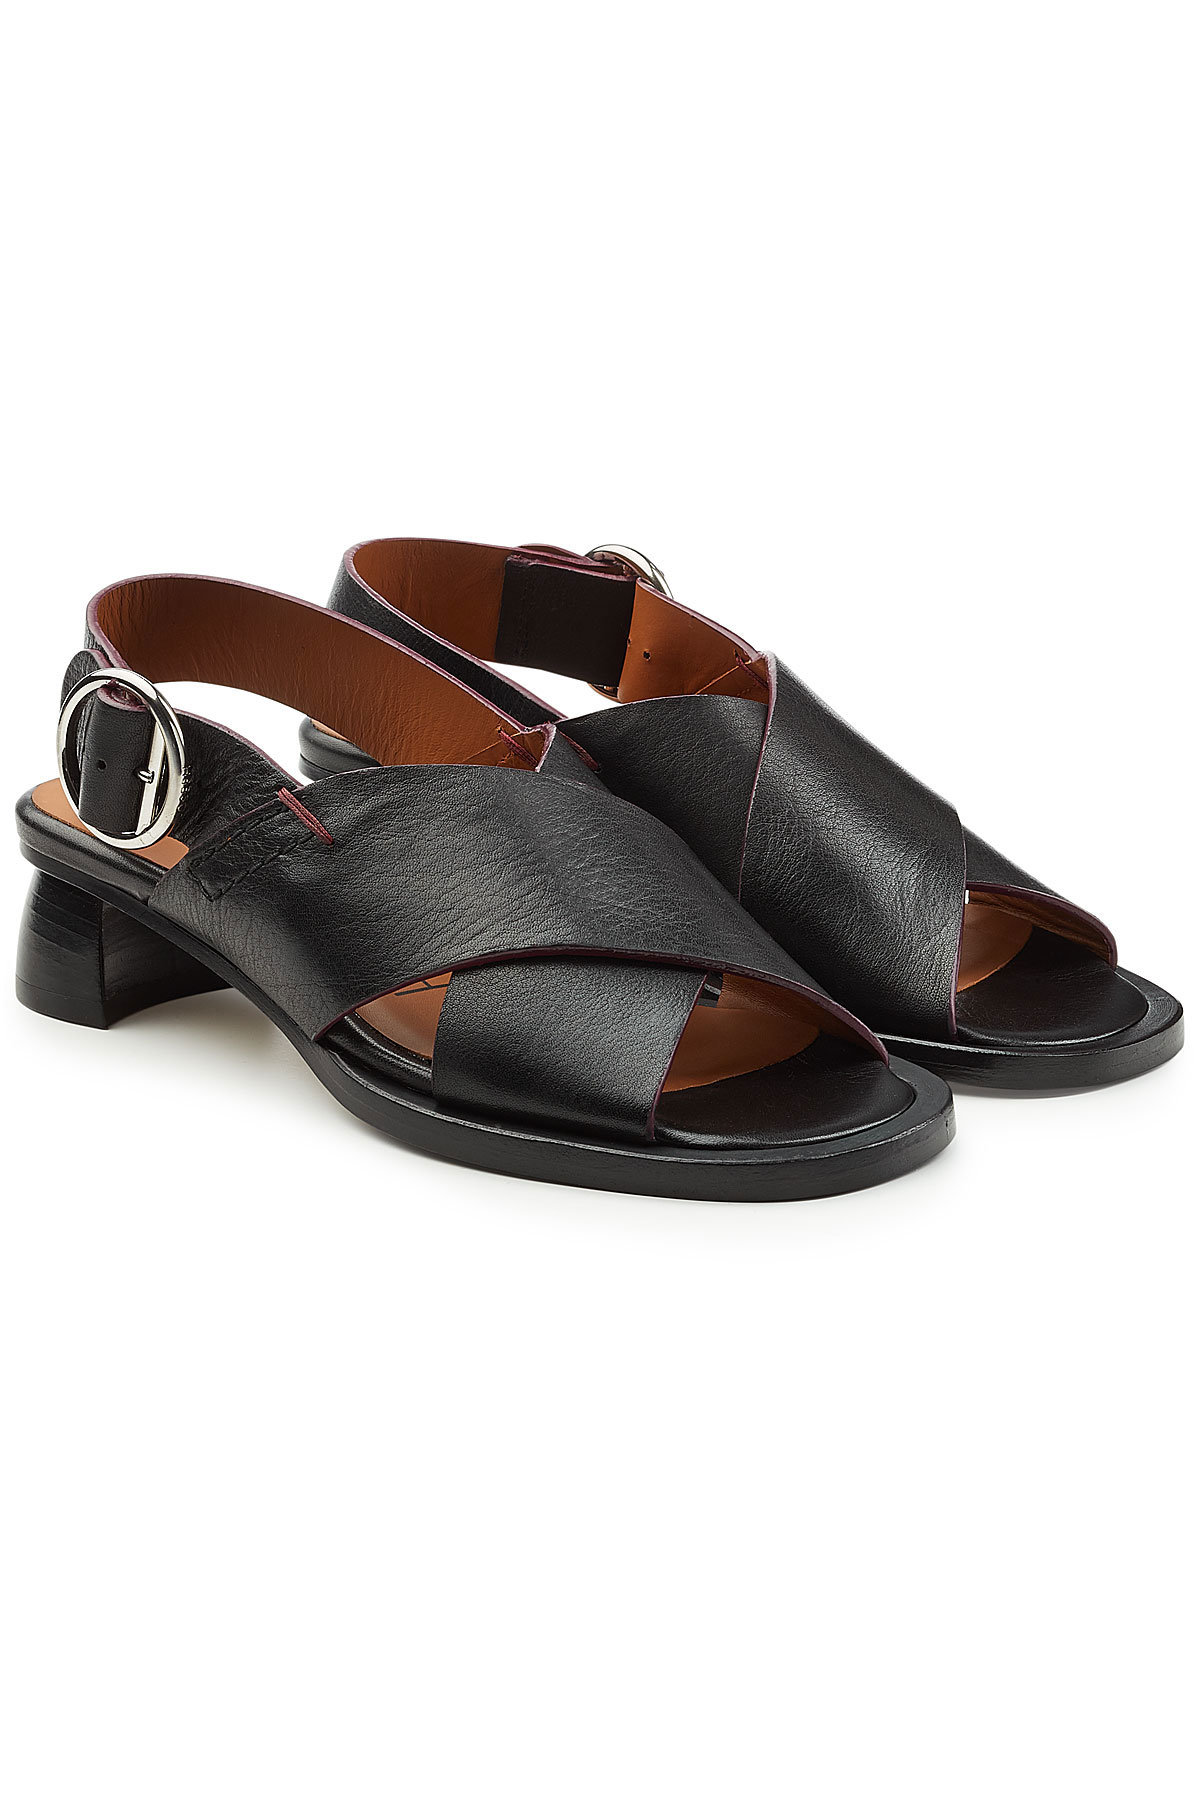 Sirp Leather Sandals by Joseph